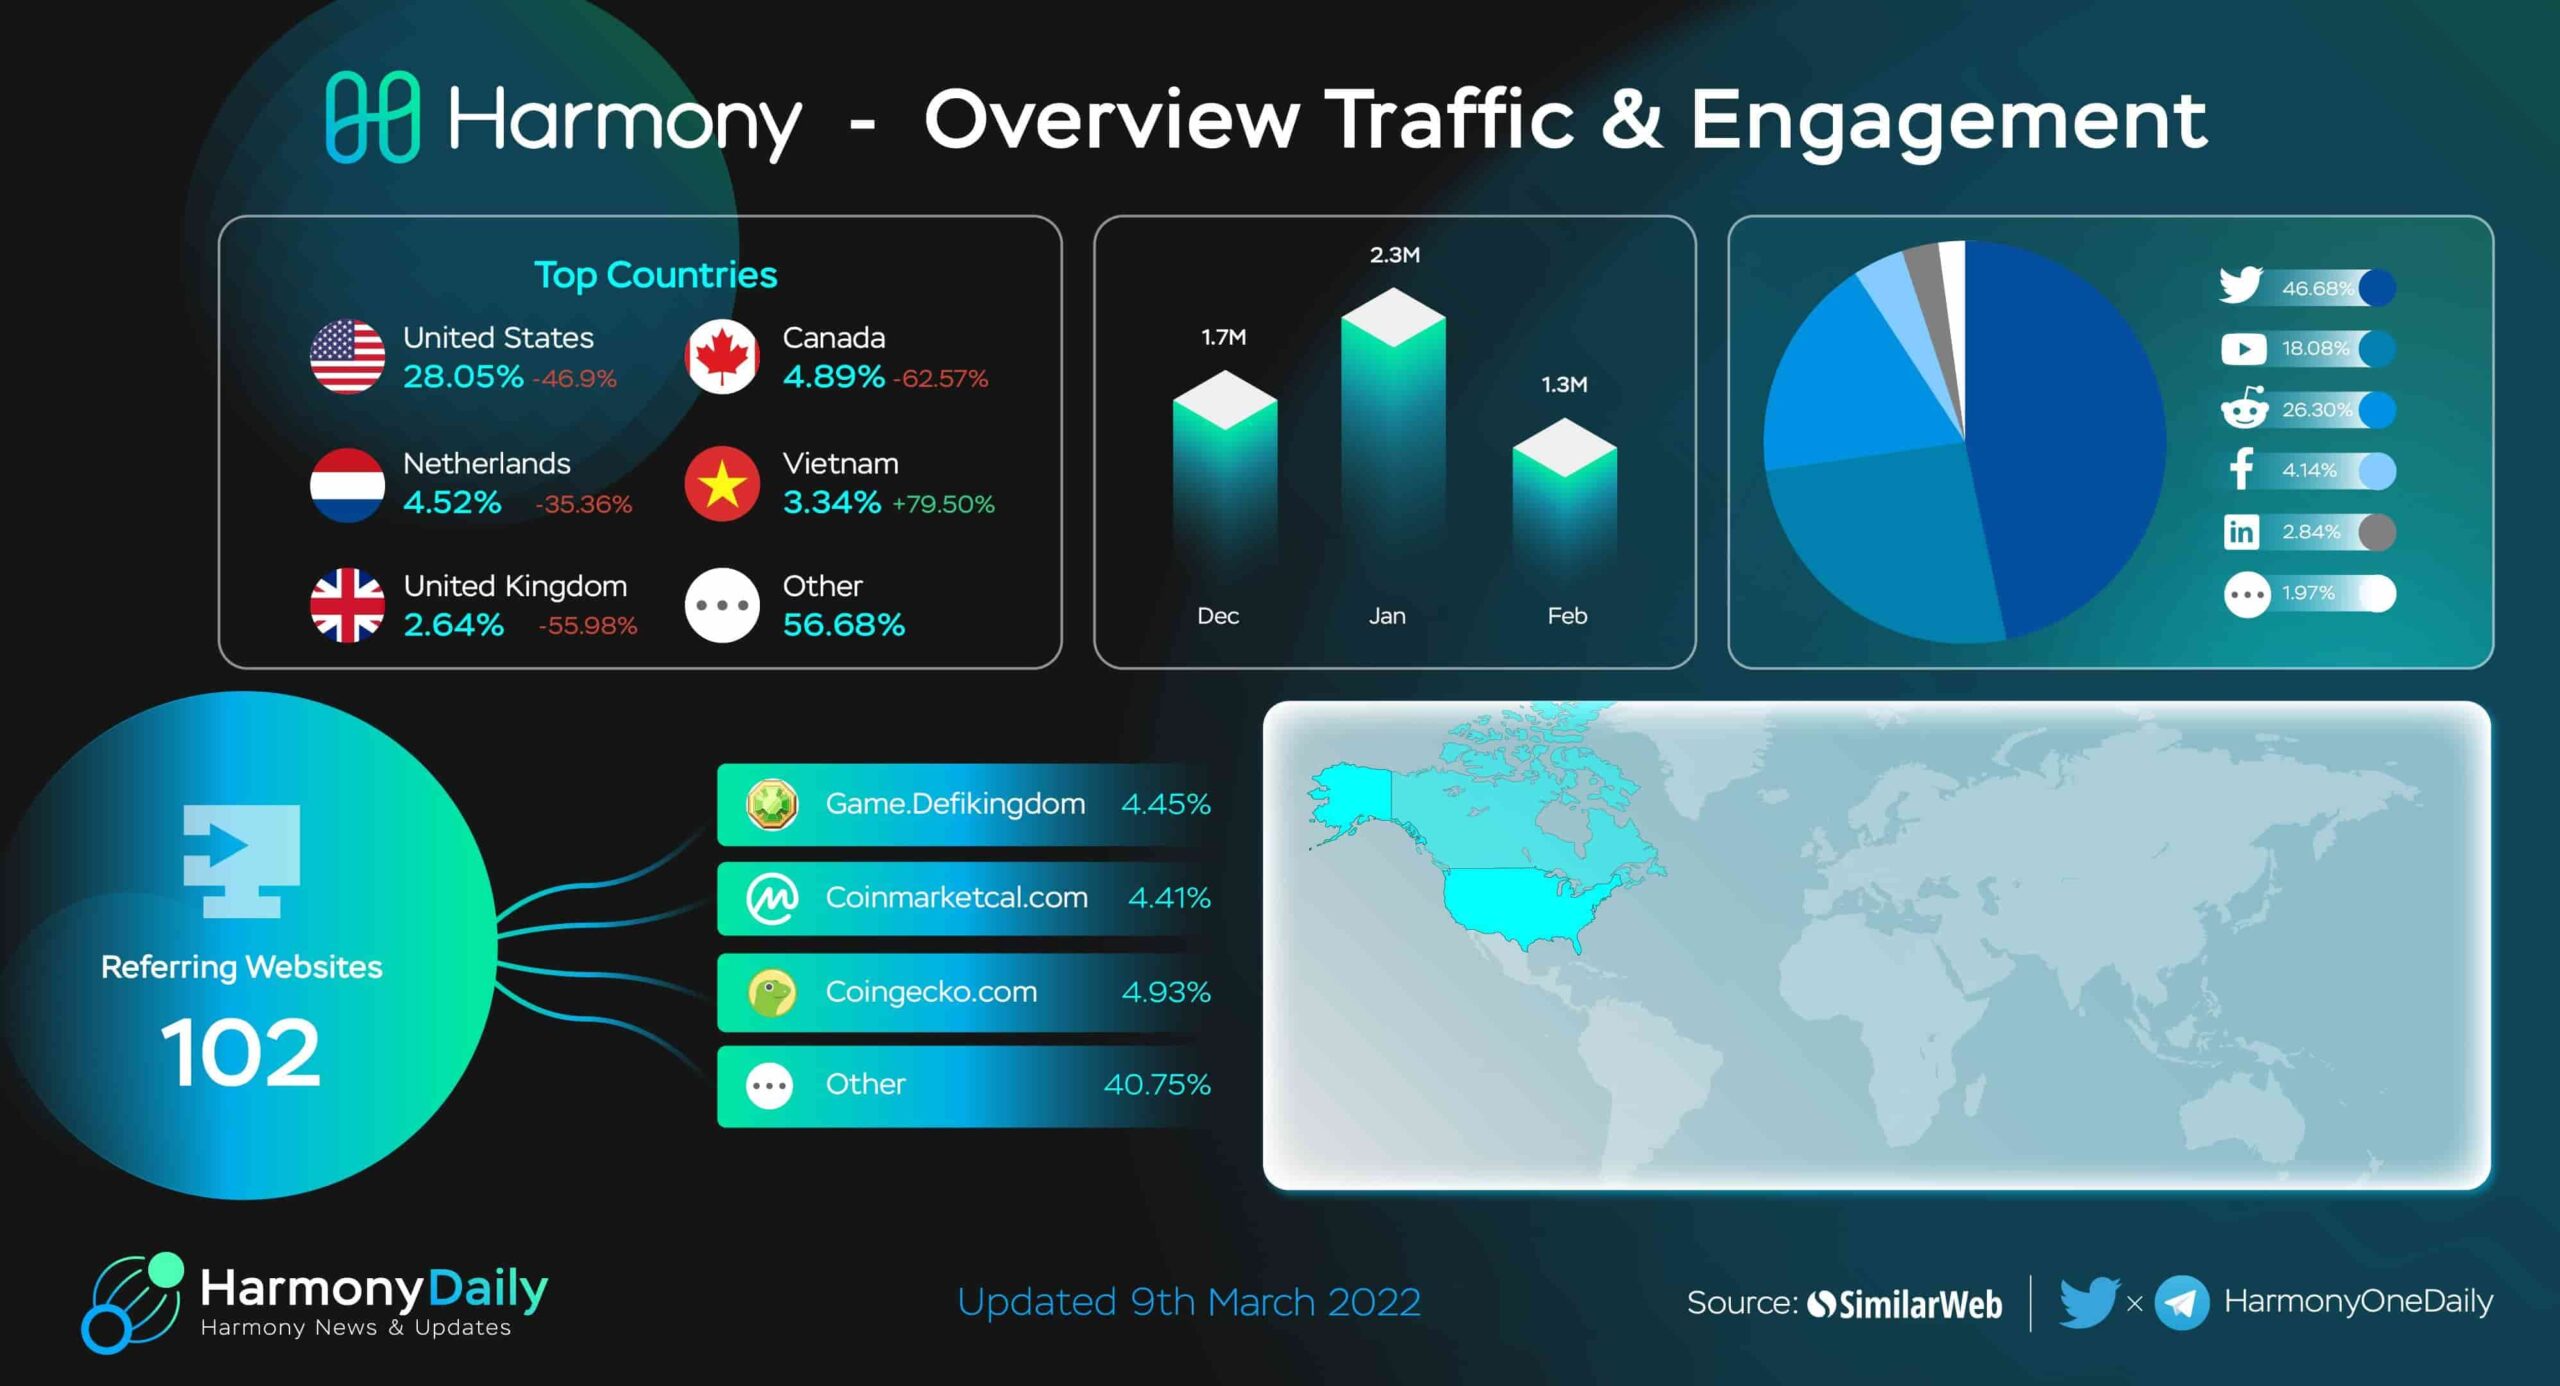 Overview of traffic & engagement of Harmony